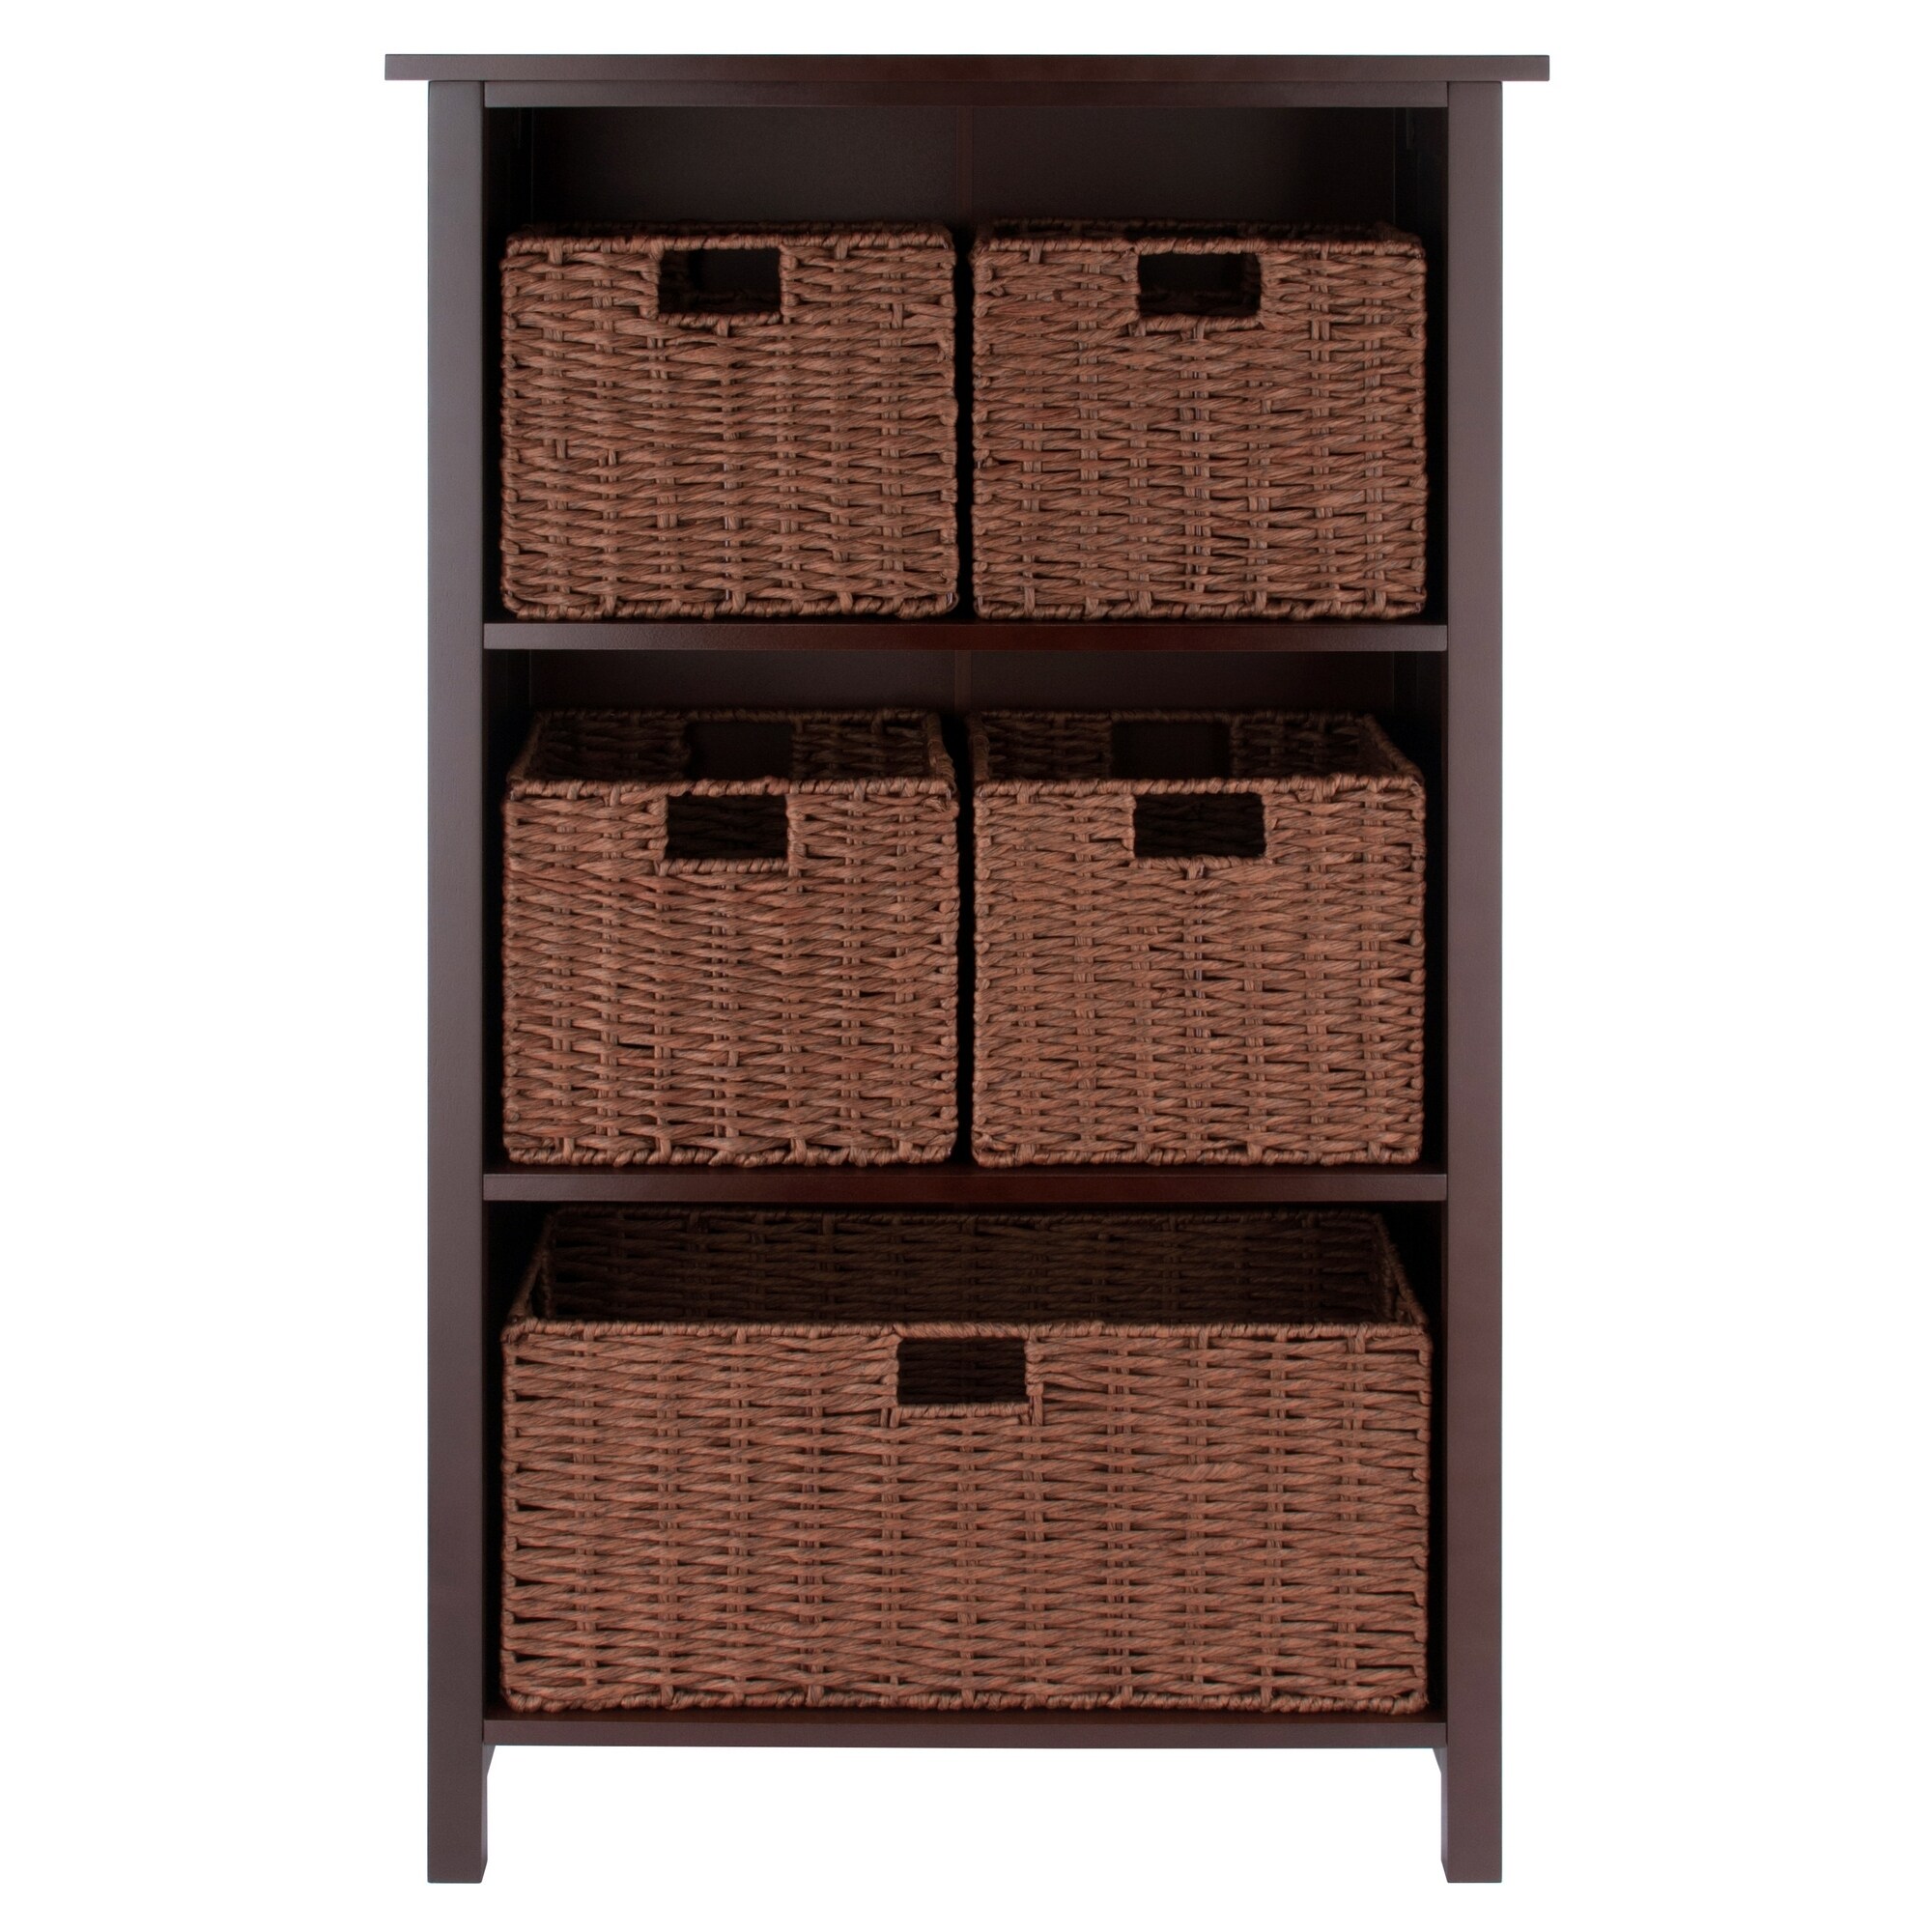 https://ak1.ostkcdn.com/images/products/is/images/direct/62eaff9cb0e2928fb70986d11f82efee70a1f0f8/Milan-6-Pc-Storage-Shelf-with-5-Foldable-Woven-Baskets%2C-Walnut.jpg